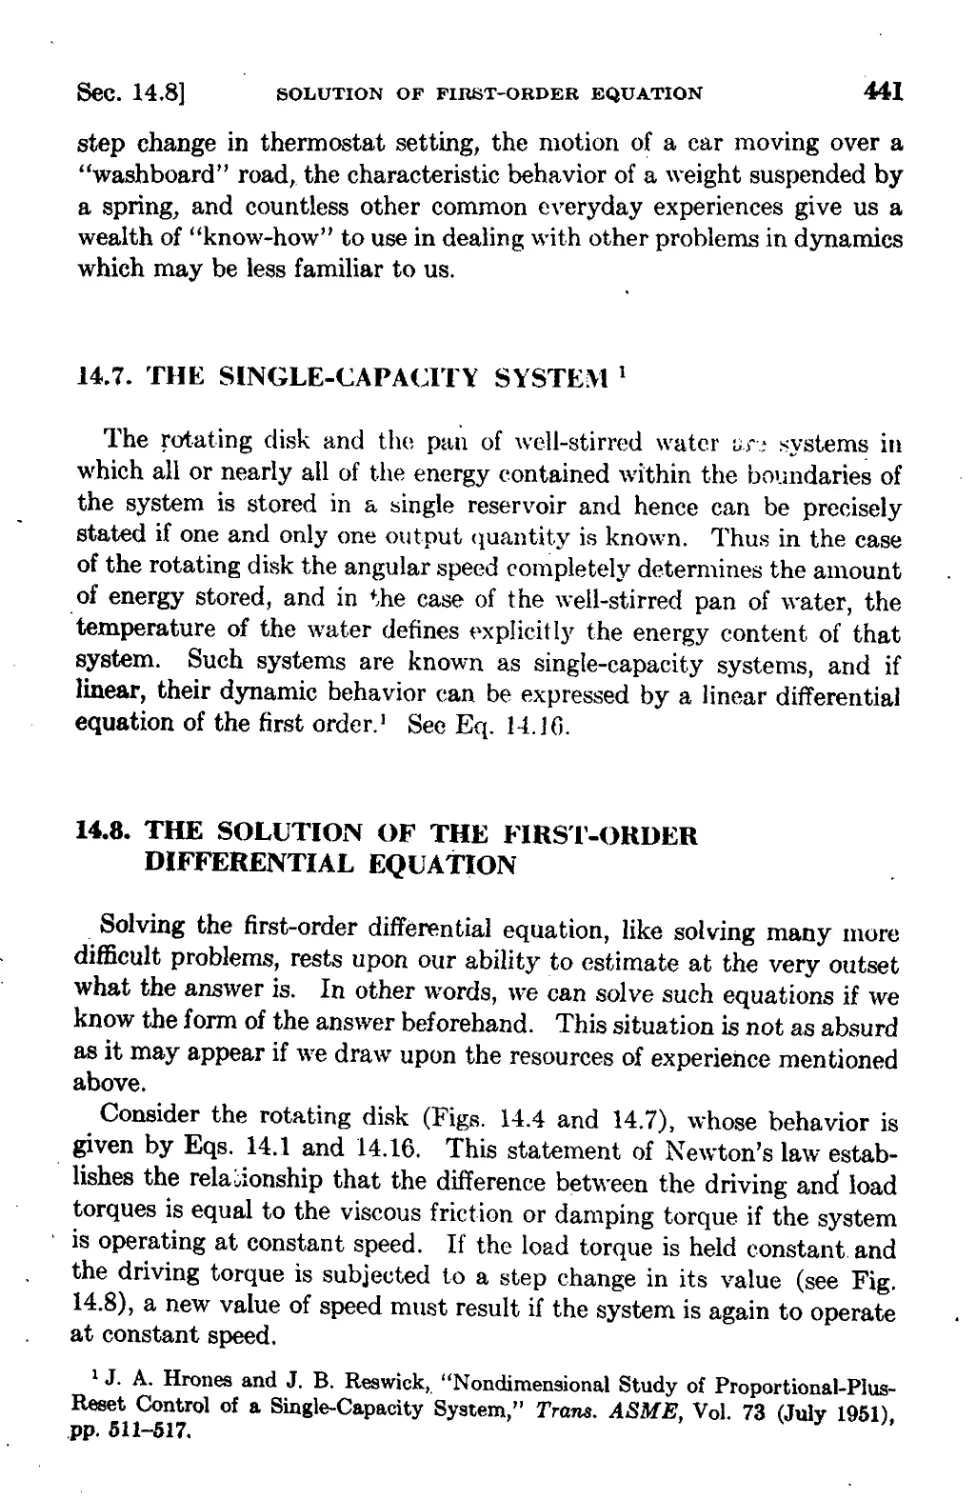 14.7 The Single-Capacity System
14.8 The Solution of the First-Order Differential Equation